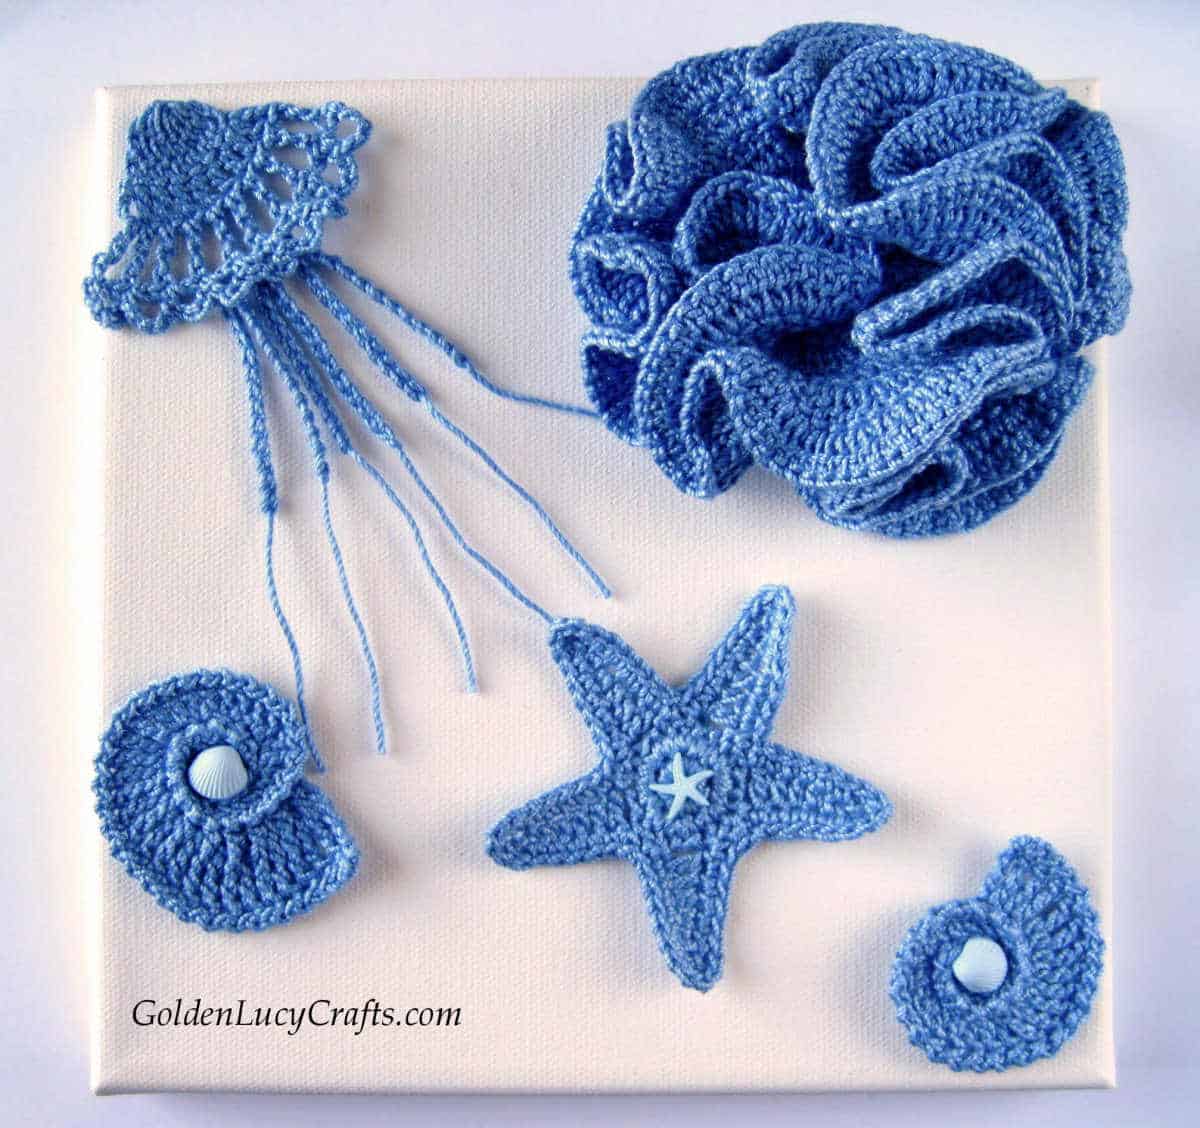 Crocheted sea motifs attached to the canvas, crochet wall art.